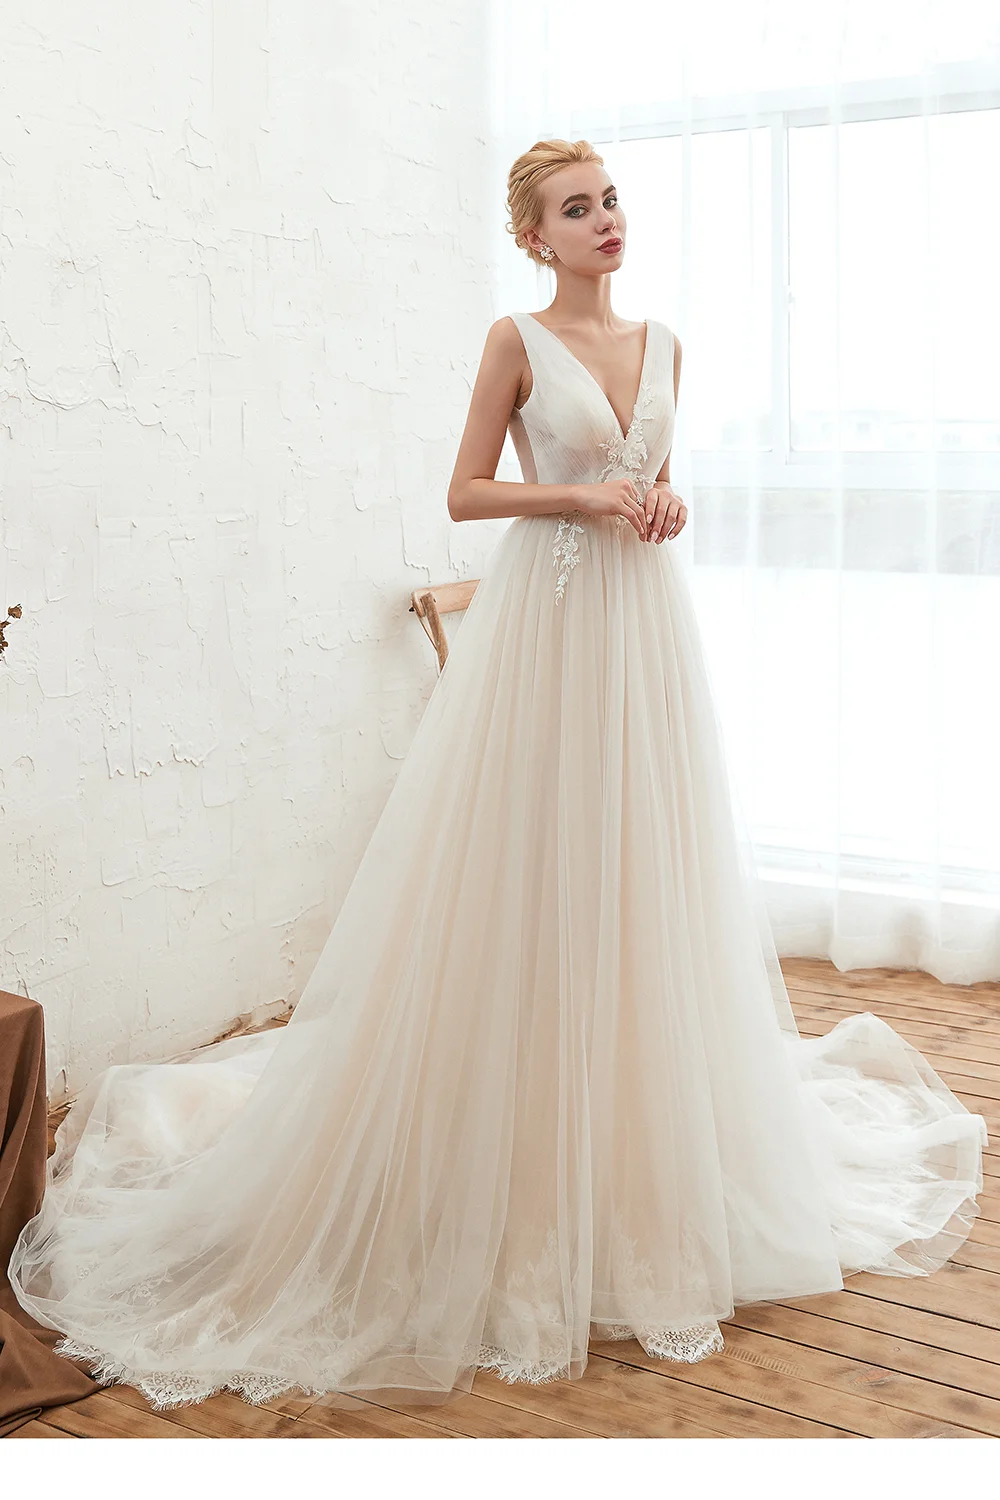 Romantic Wide Straps Deep V-neck Floor-length Wedding Dress A-Line With Tulle